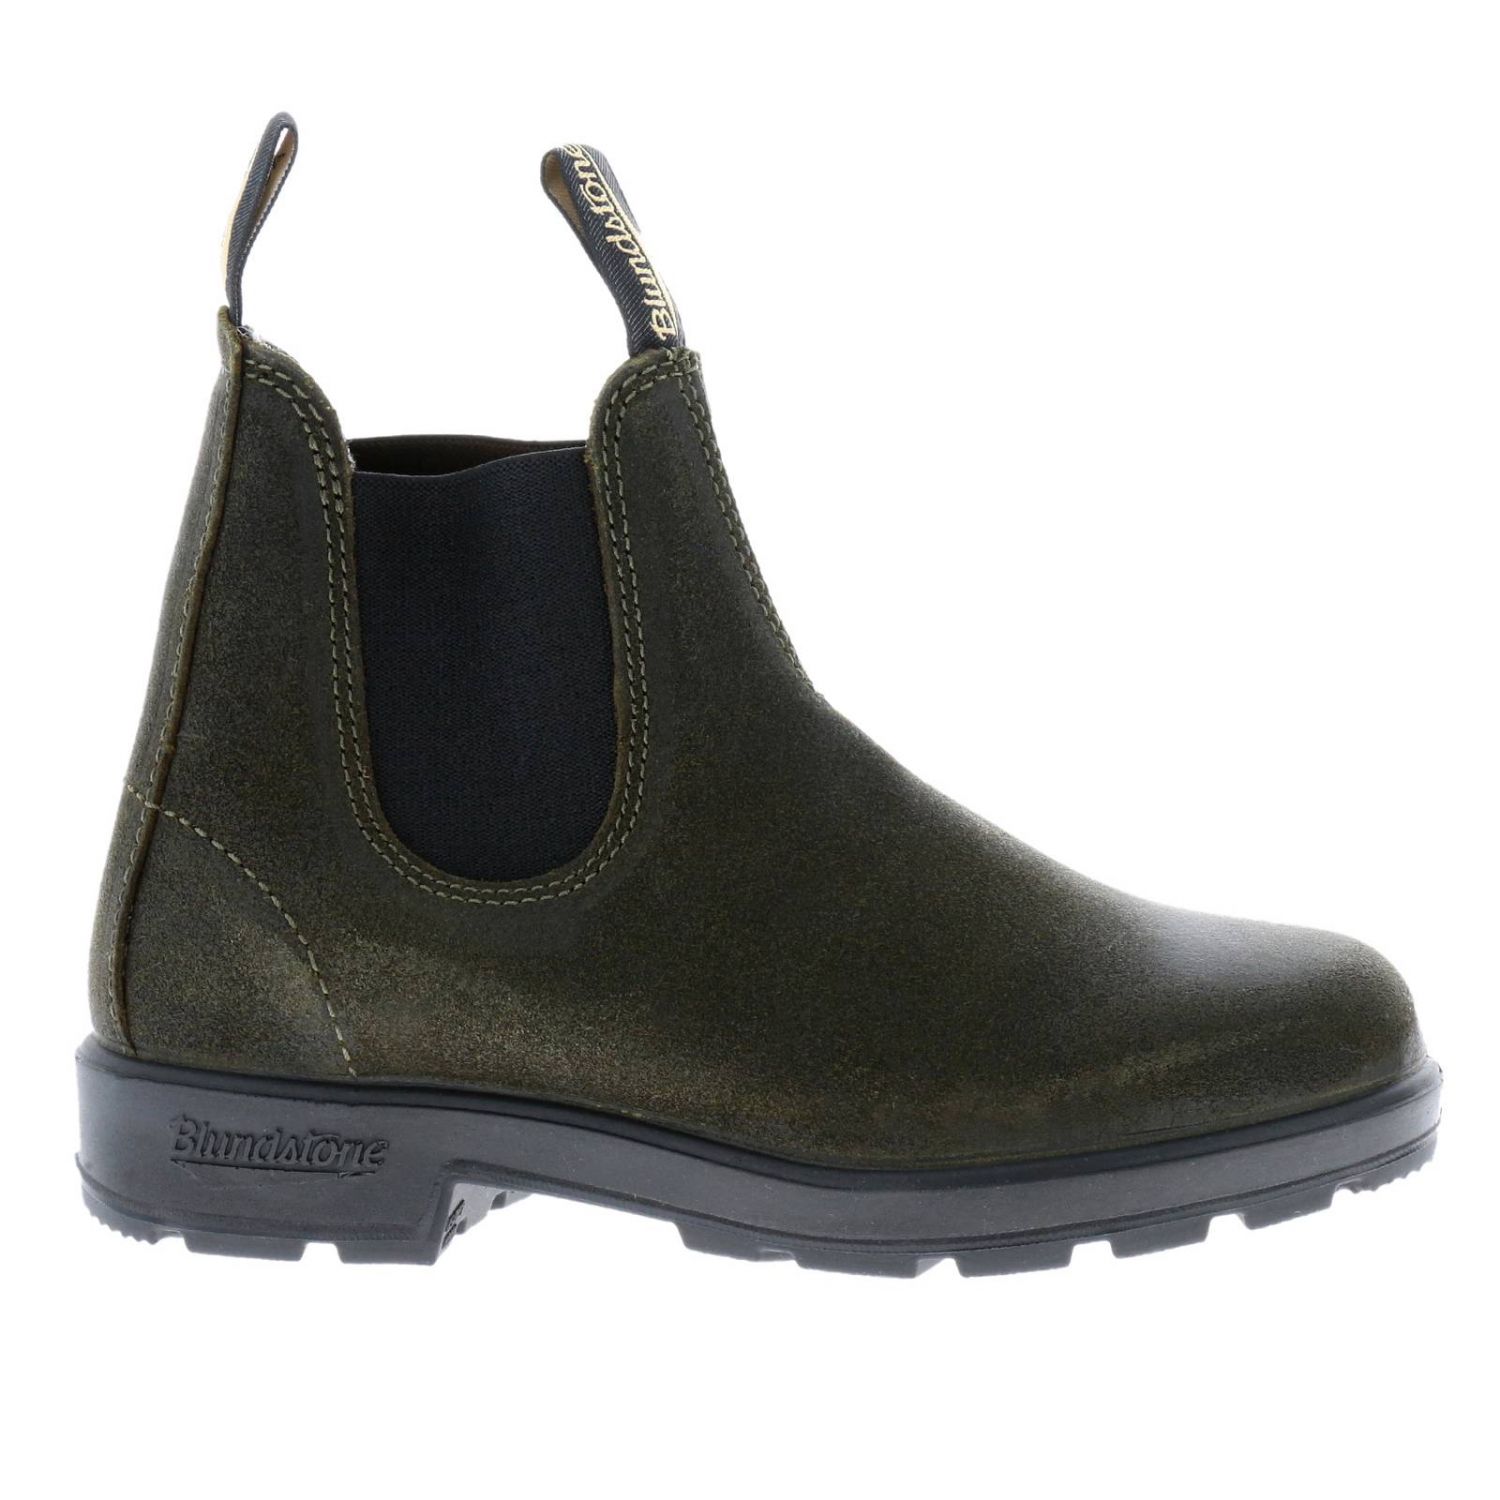 Blundstone Outlet: Shoes women - Forest Green | Flat Booties Blundstone ...